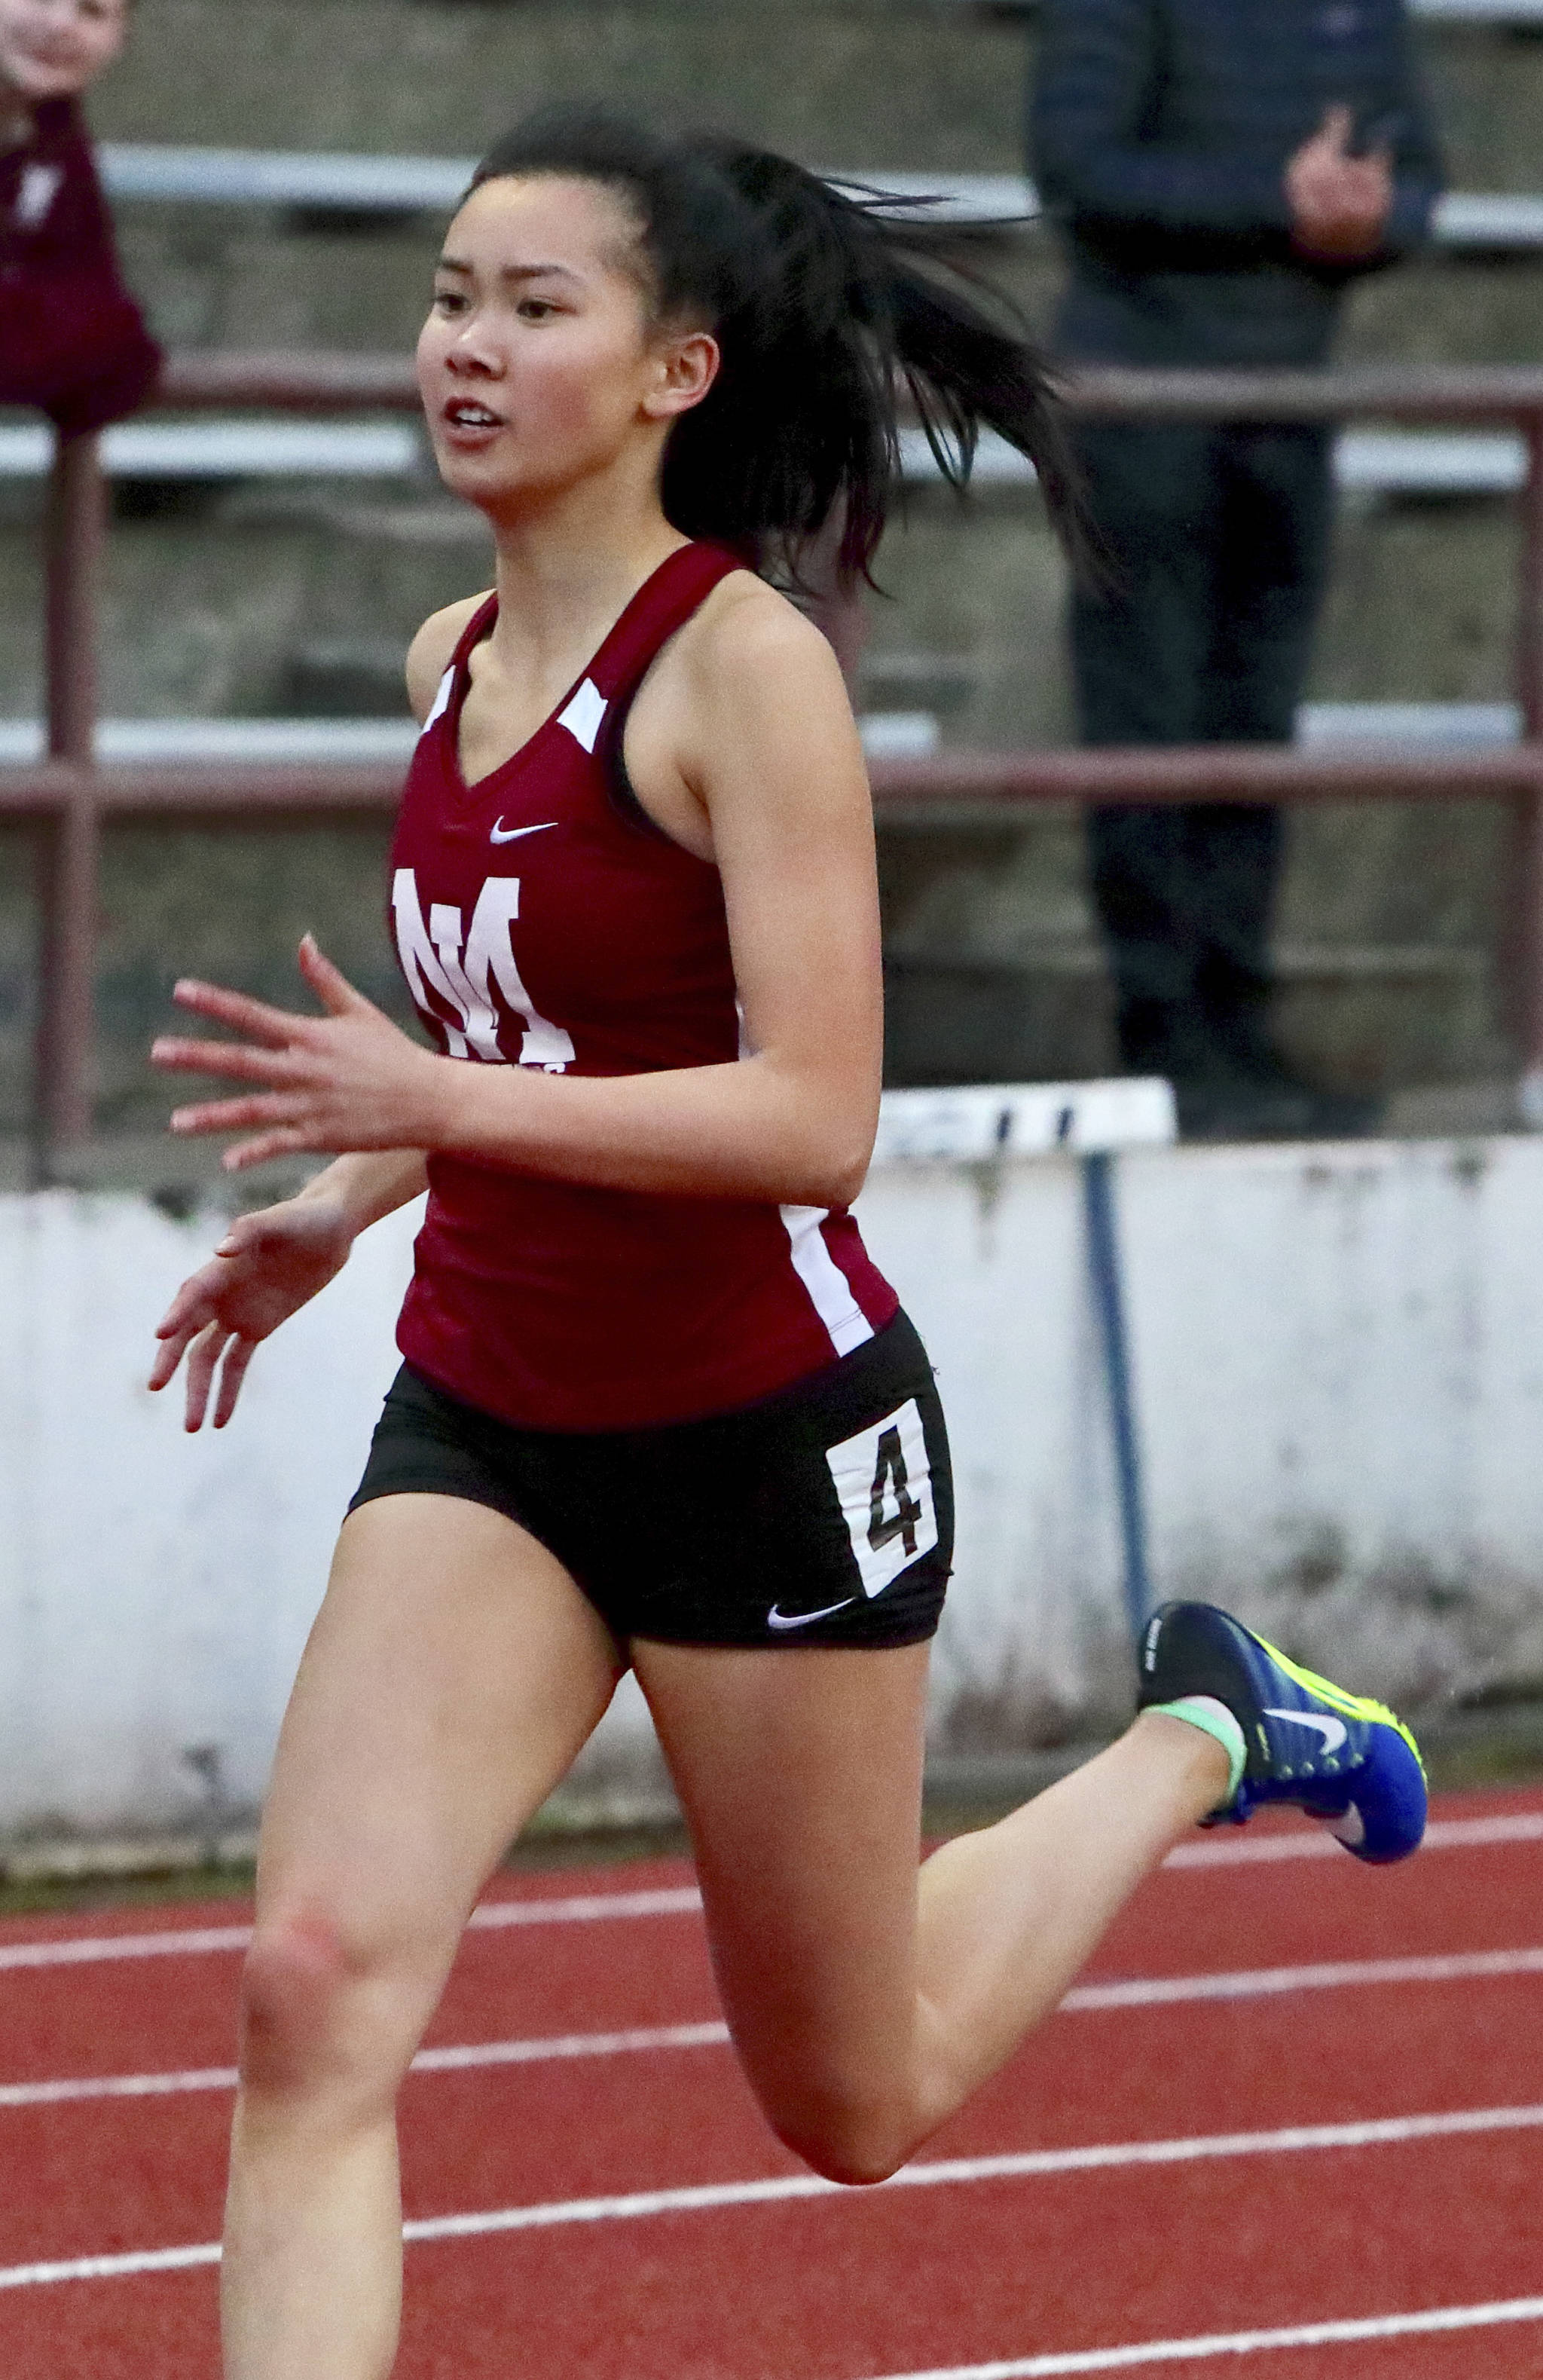 Photo courtesy of Toby Swanson                                The Mercer Island Islanders girls and boys track teams competed at the coveted Eason Invitational on April 21 at Snohomish High School.                                Islanders’ senior Kayla Lee (pictured) earned first place in the 400-meter dash with a time of 58.35. Mercer Island athletes who competed at the Eason Invitational consist of Christian Avilez, Alex Benson, Hatcher Childress, Michael Deal, Charles Fischer, Alex Pritchard, Ty Thomas, Jeffery Tian, Eli Yen, Maggie Baker, Gretchen Blohm, Eliza Crenshaw, Ella Hensey, Susie Lepow, Katie McCormick, Chloe Michaels, Faith Osei-Tutu, Maya Virdell and Kendra Watson.